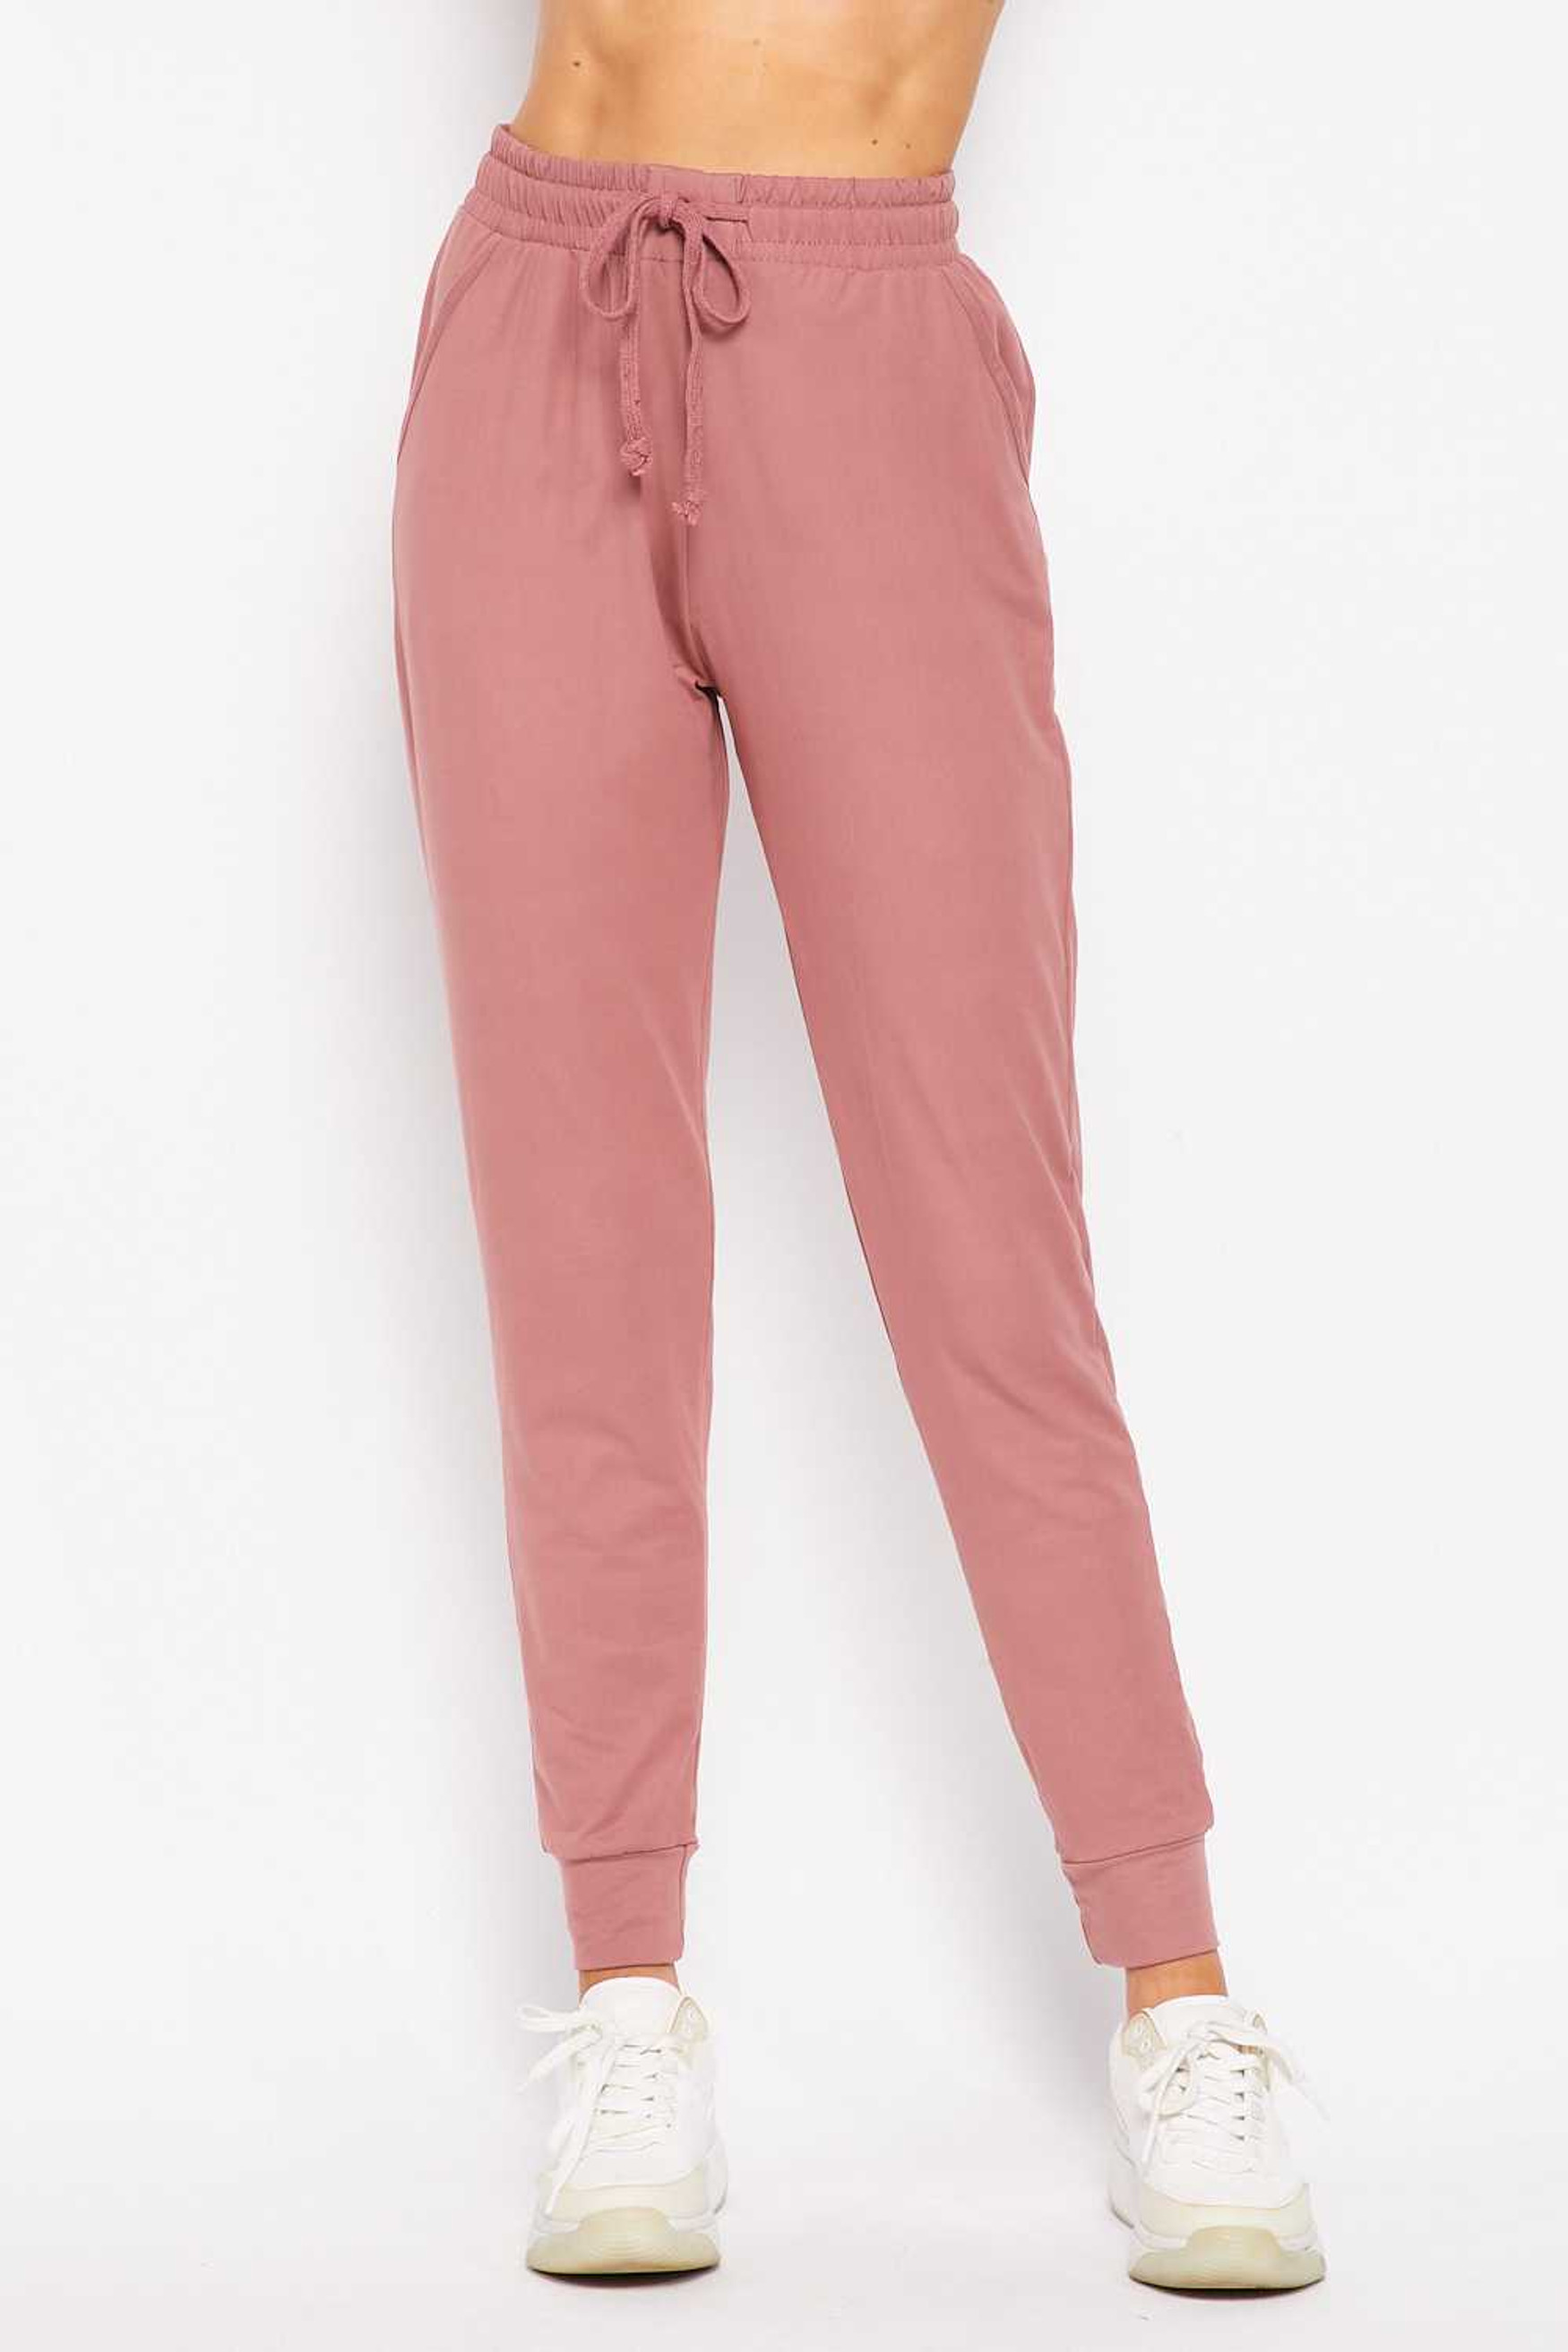 Buttery Soft Basic Solid Plus Size Joggers - New Mix